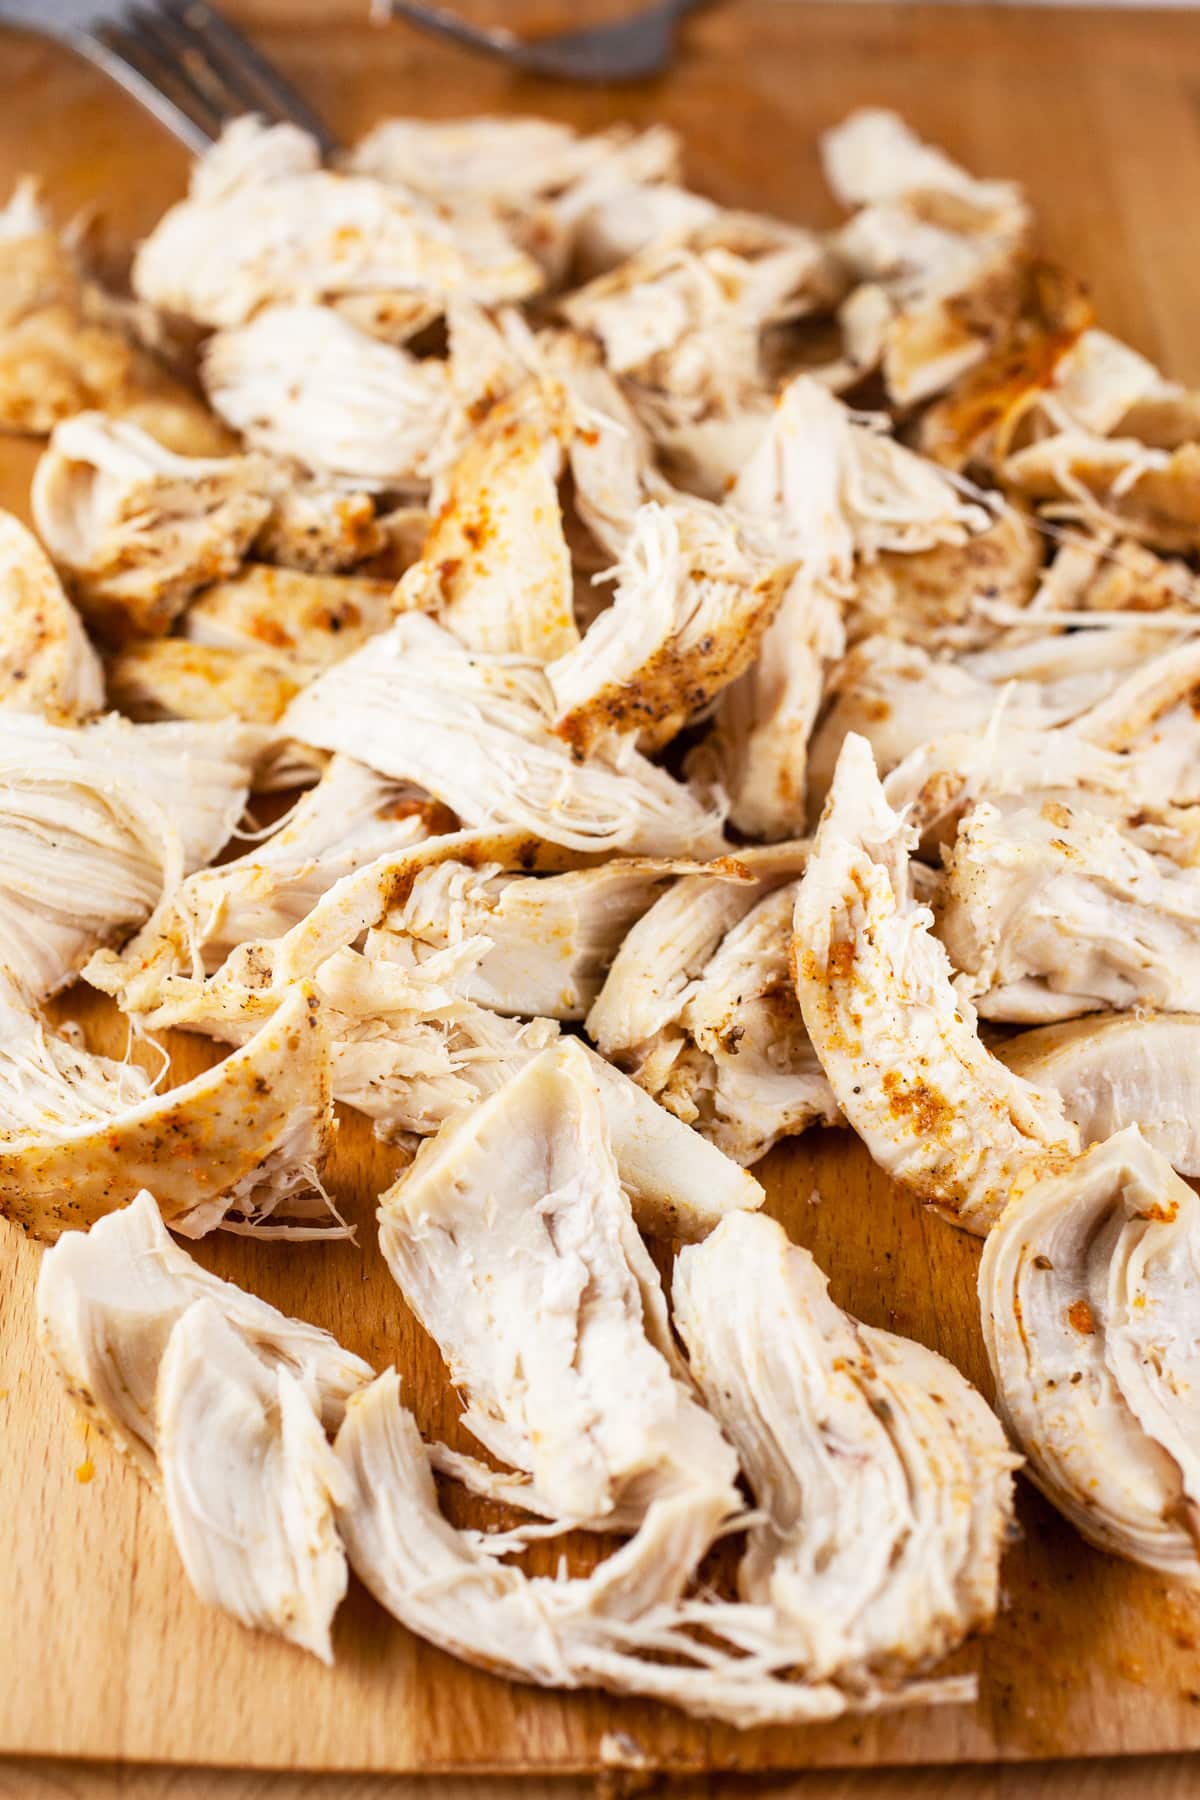 Shredded cooked chicken breasts on wooden cutting board.